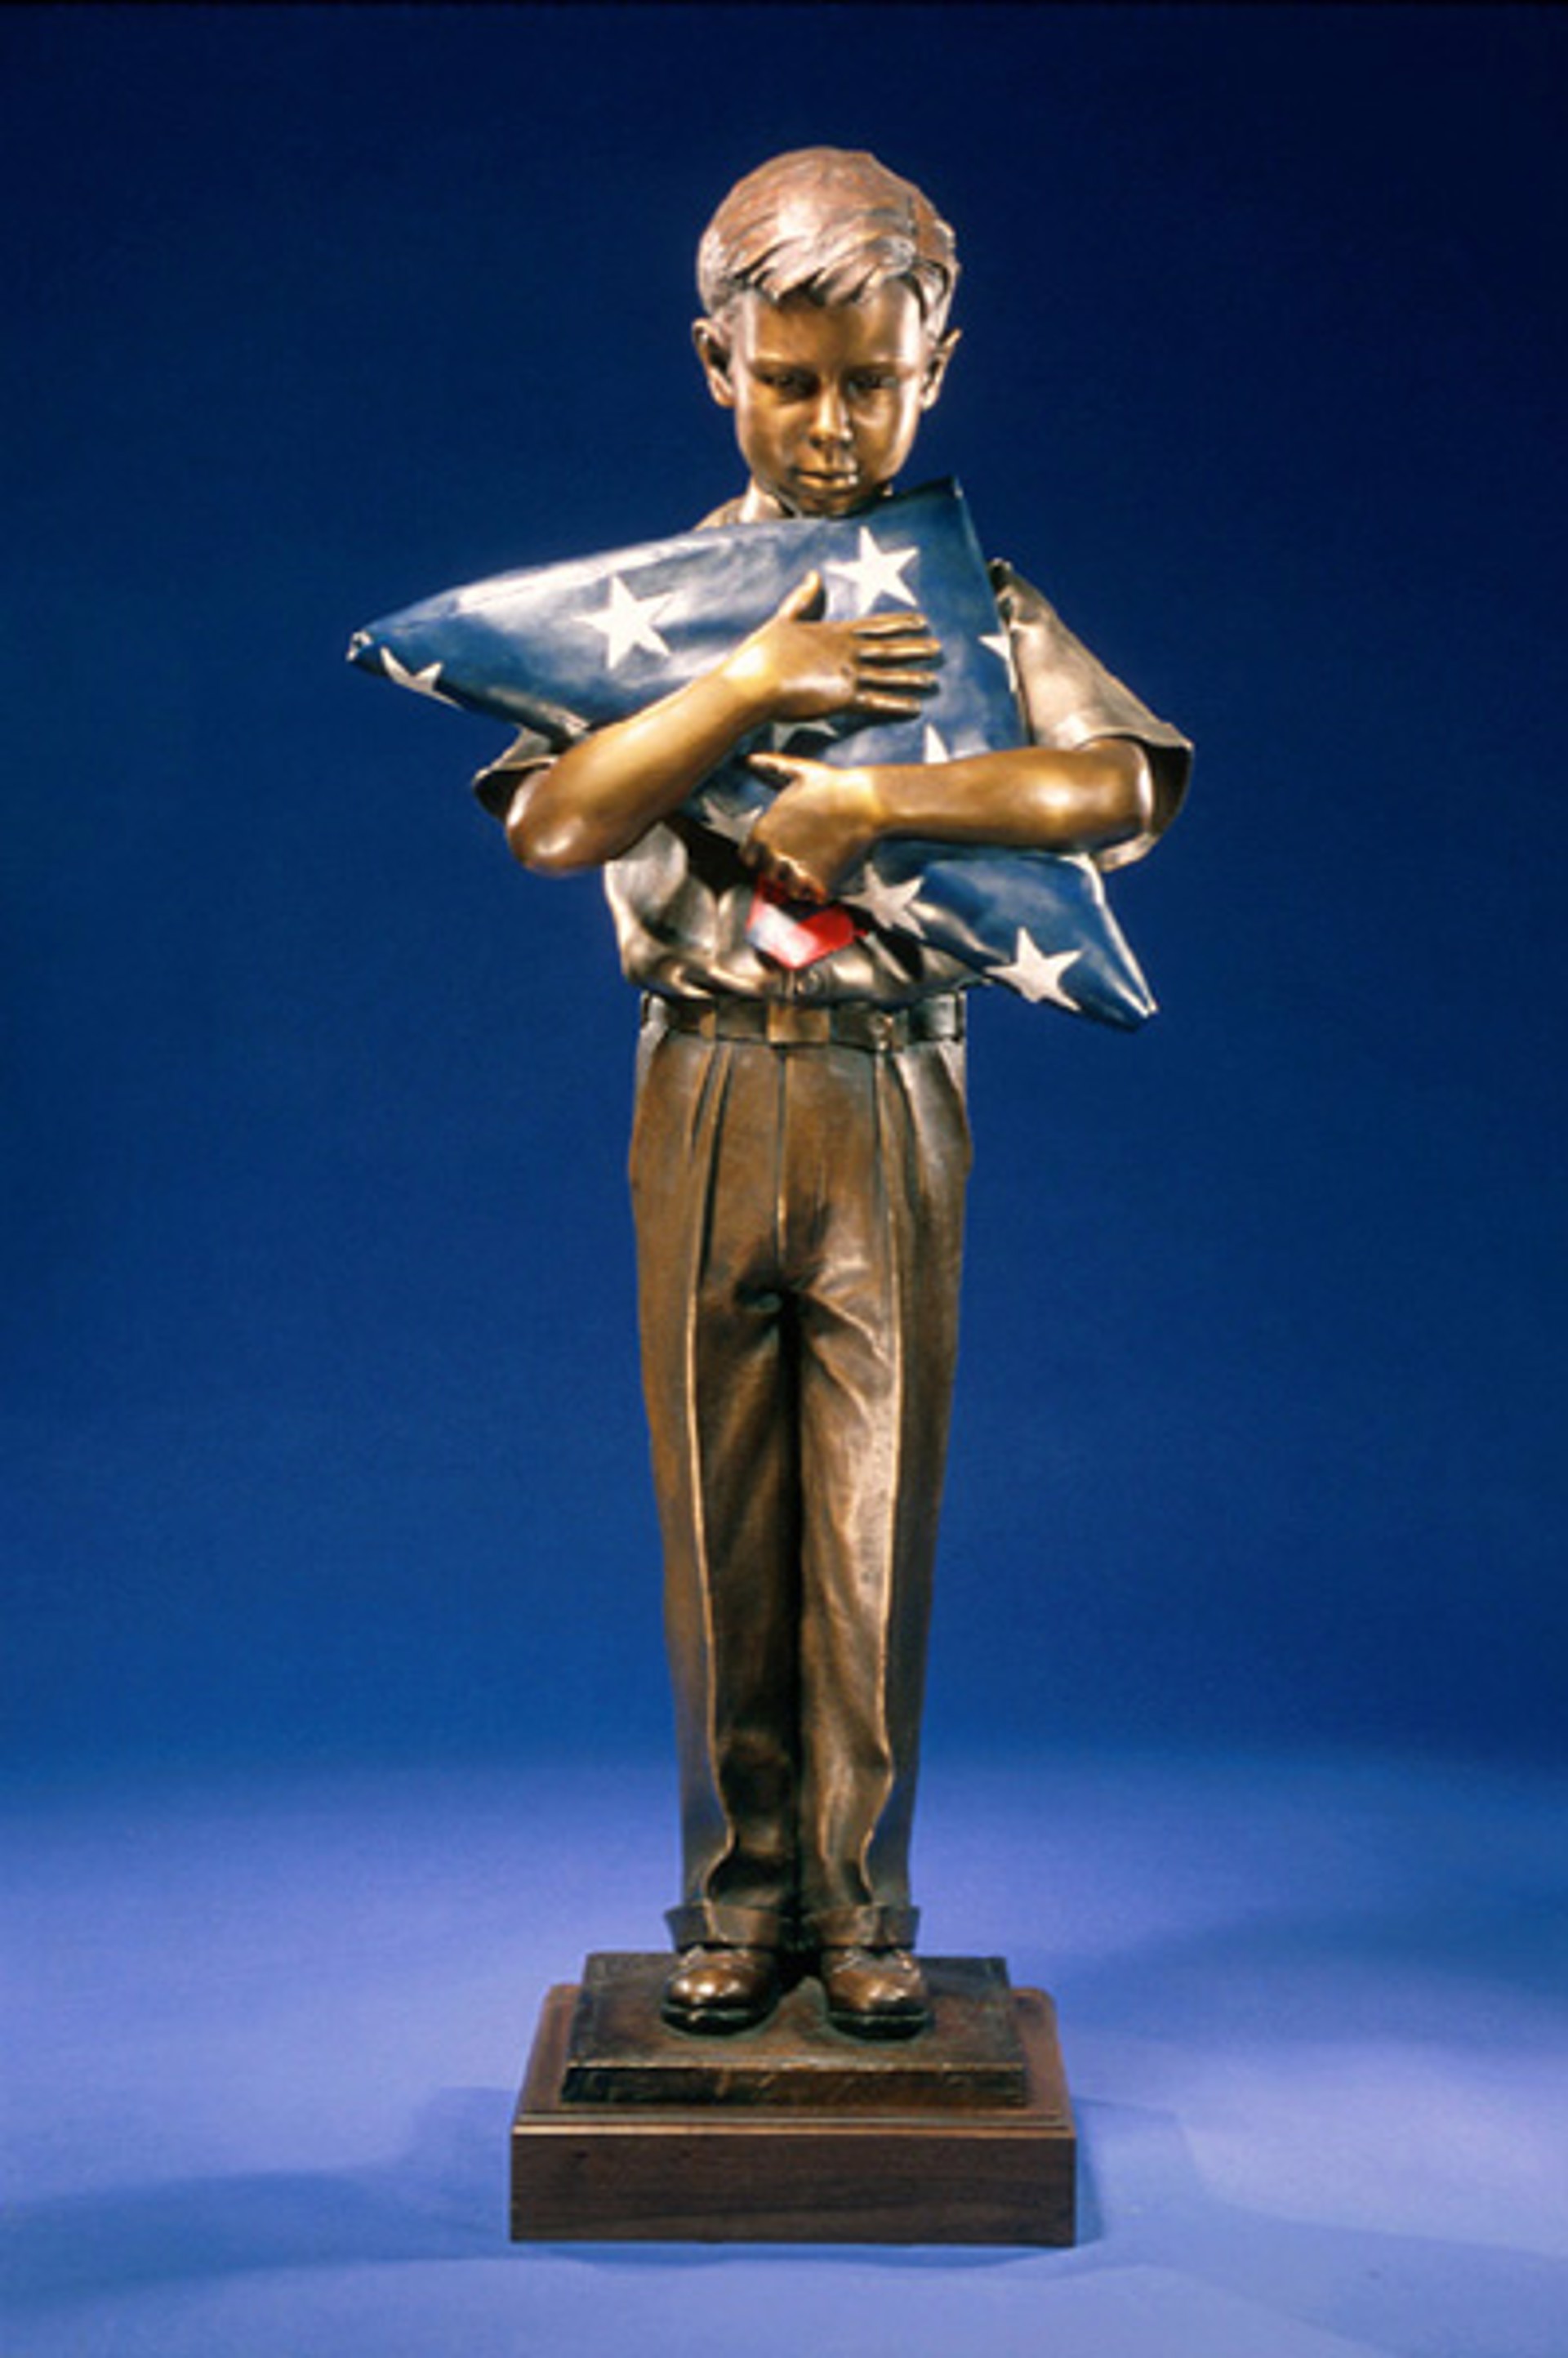 Field of Blue by George Lundeen